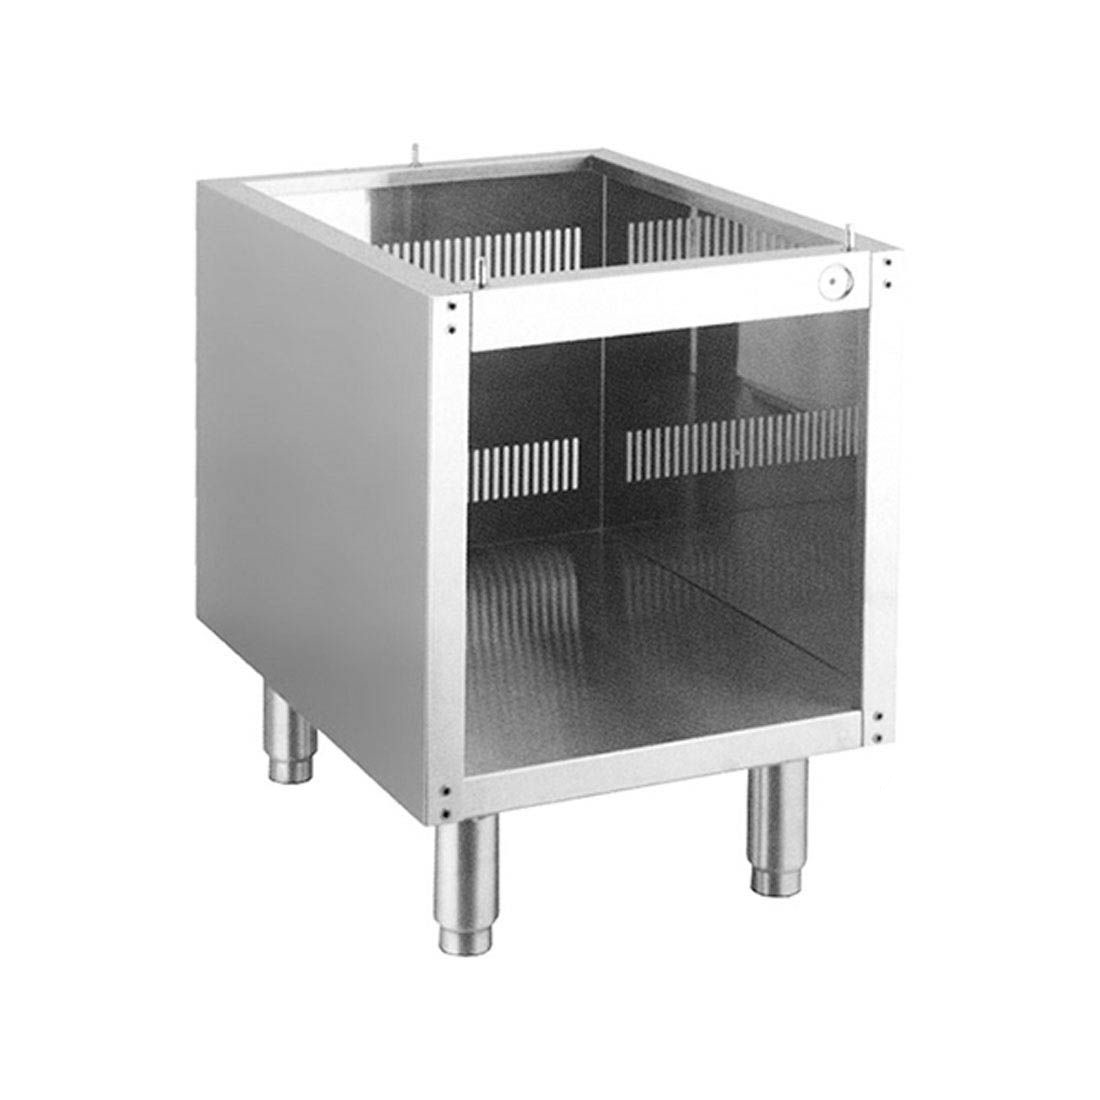 JUS400 â€“ Cabinet Stand for Gas Max JUS Range 400mm